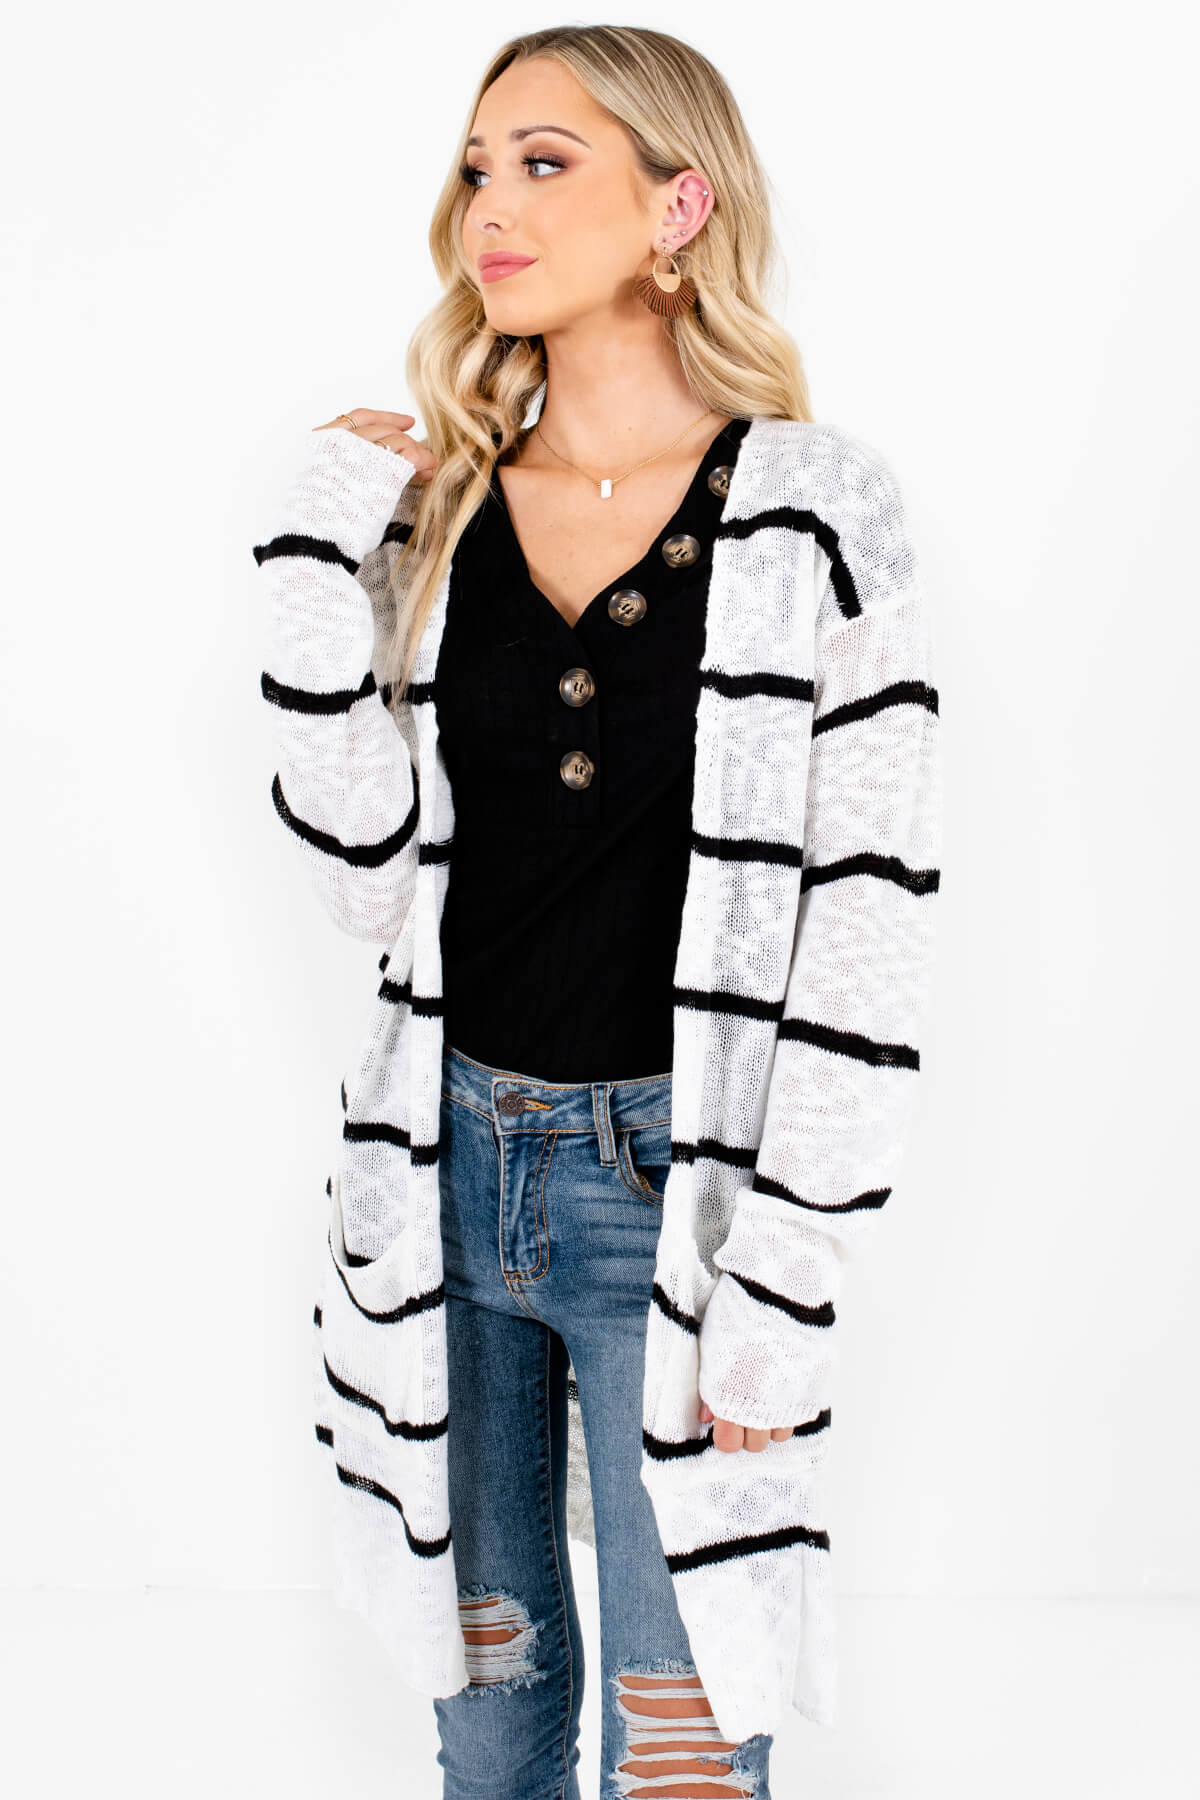 Changing Seasons White Striped Cardigan | Boutique Outerwear